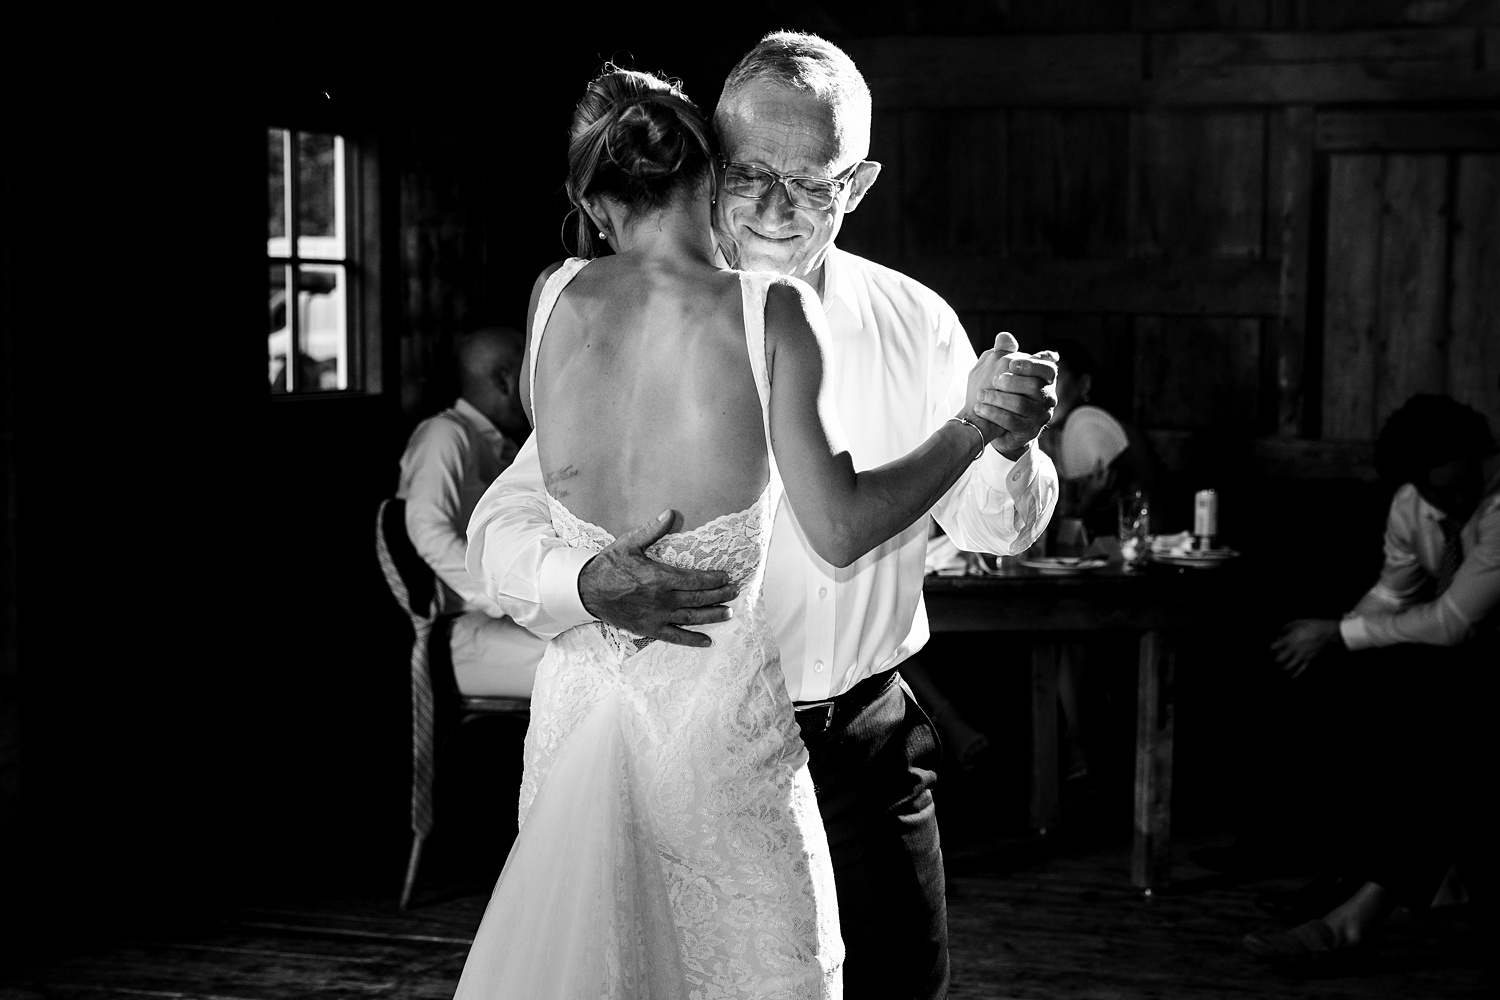 Father and daughter dance at the wedding reception